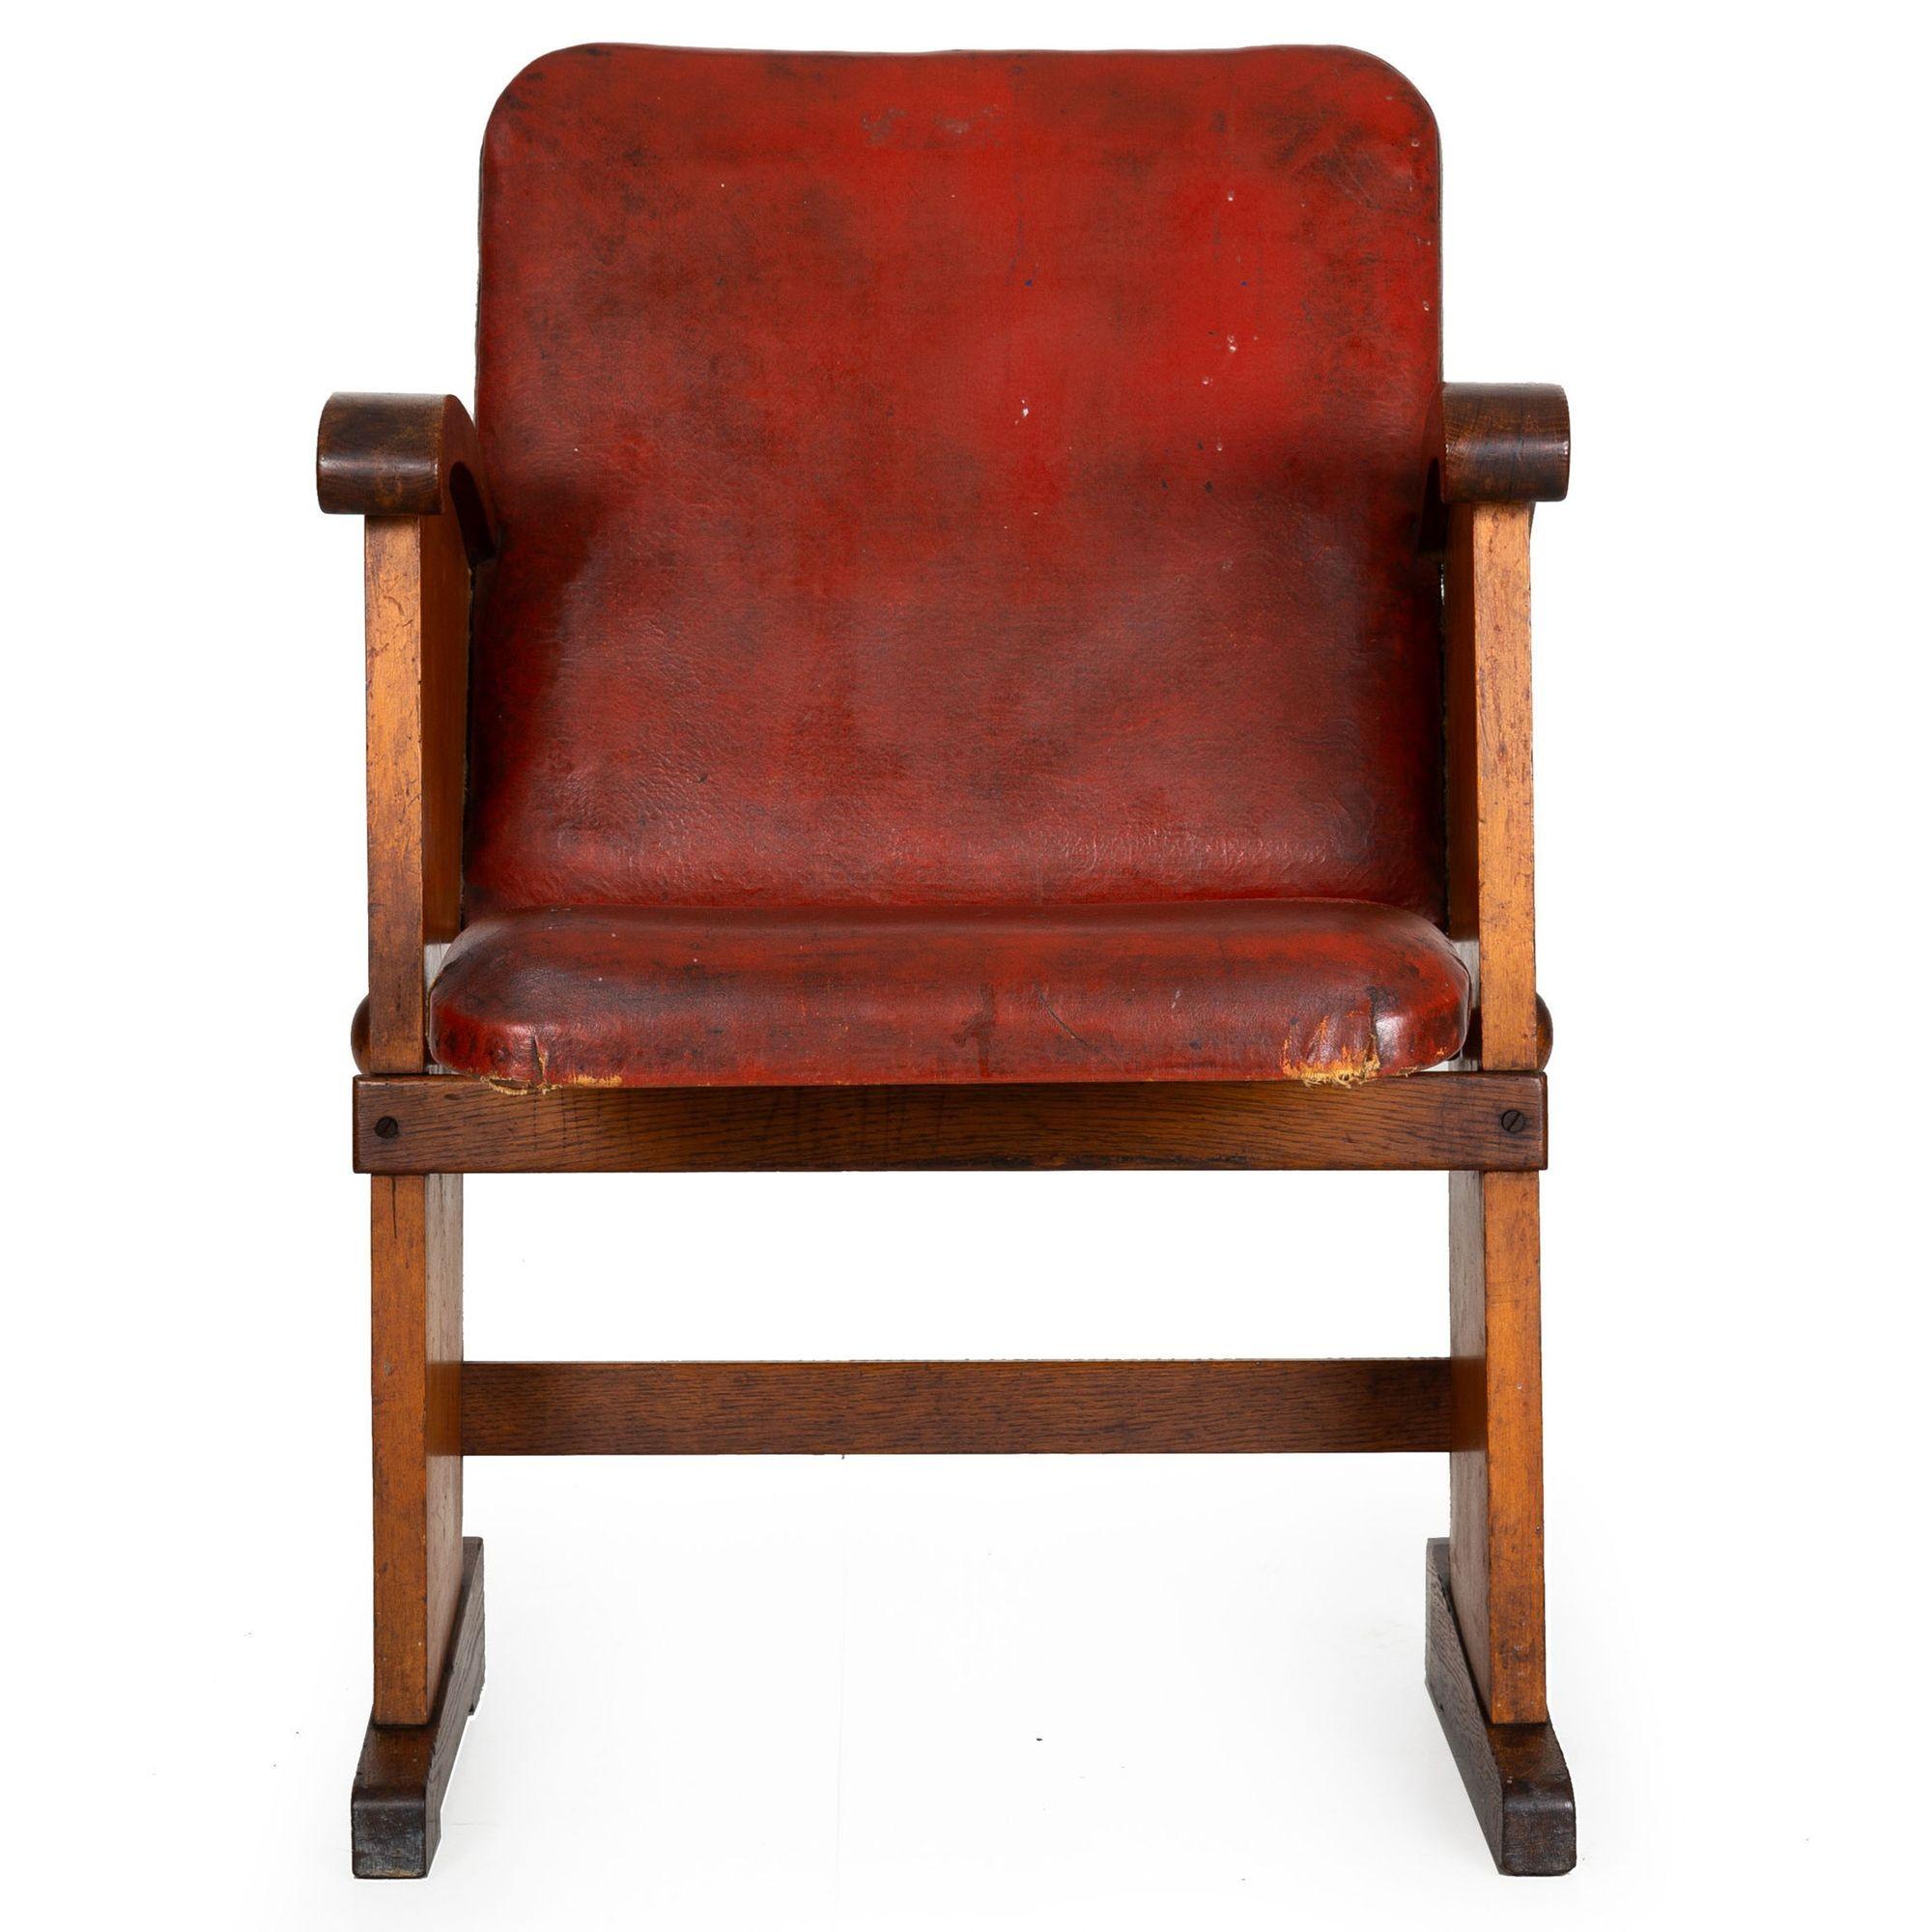 This rare and most compelling cinema chair absolutely pops with its rich and untouched historical surface throughout. The chair features a folding seat with original maroon-red faux-leather upholstery bordered on the seat-back by a thin element of